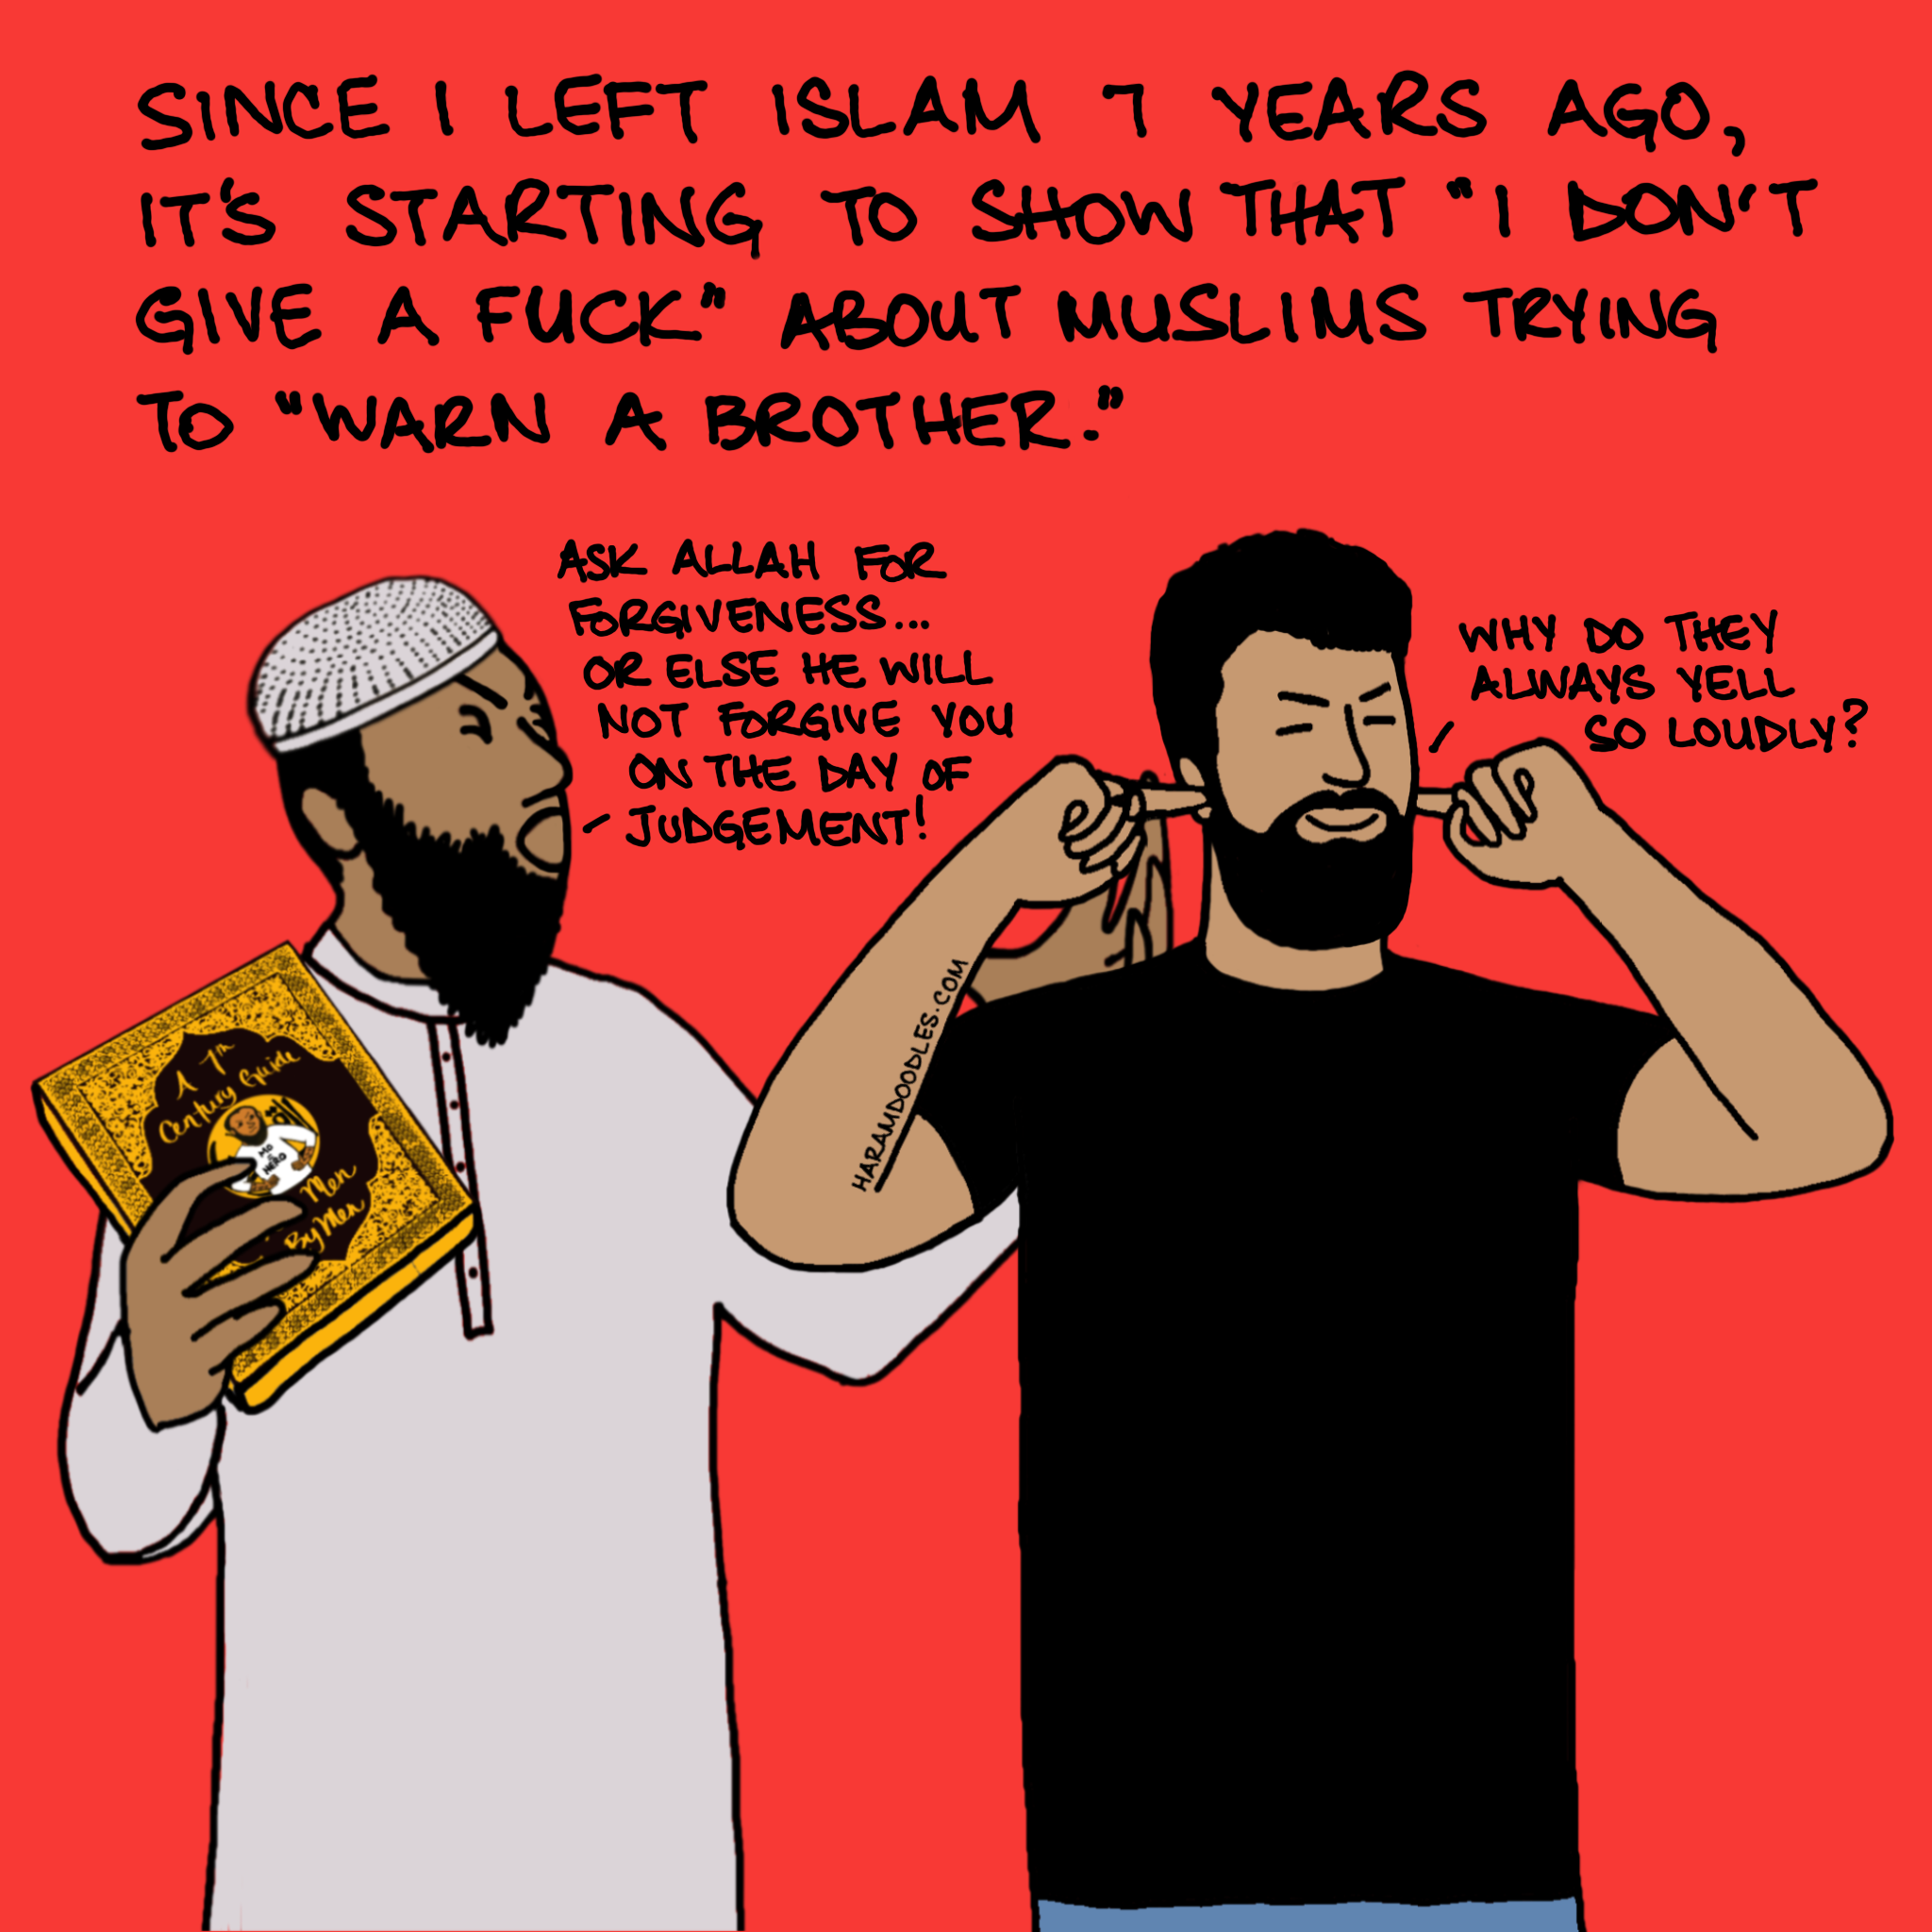 Since I left Islam Series by ExMuslims